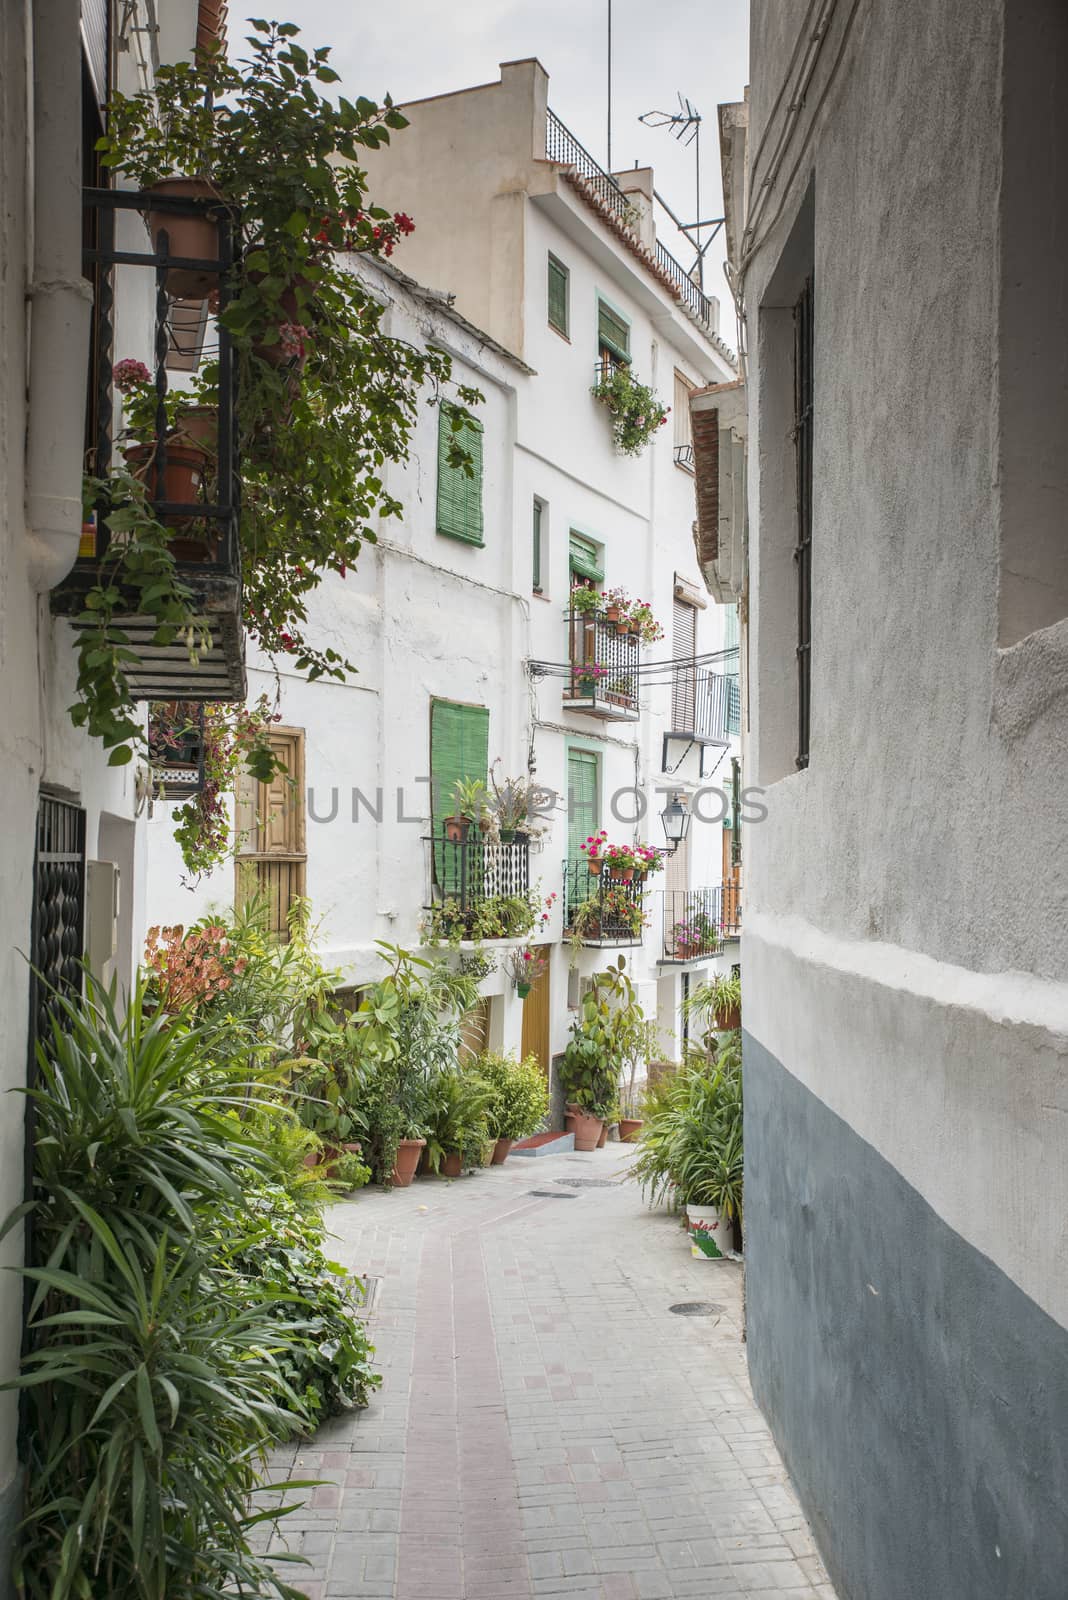 typical street in andalusia spain with white houses and basket with flowers in the street